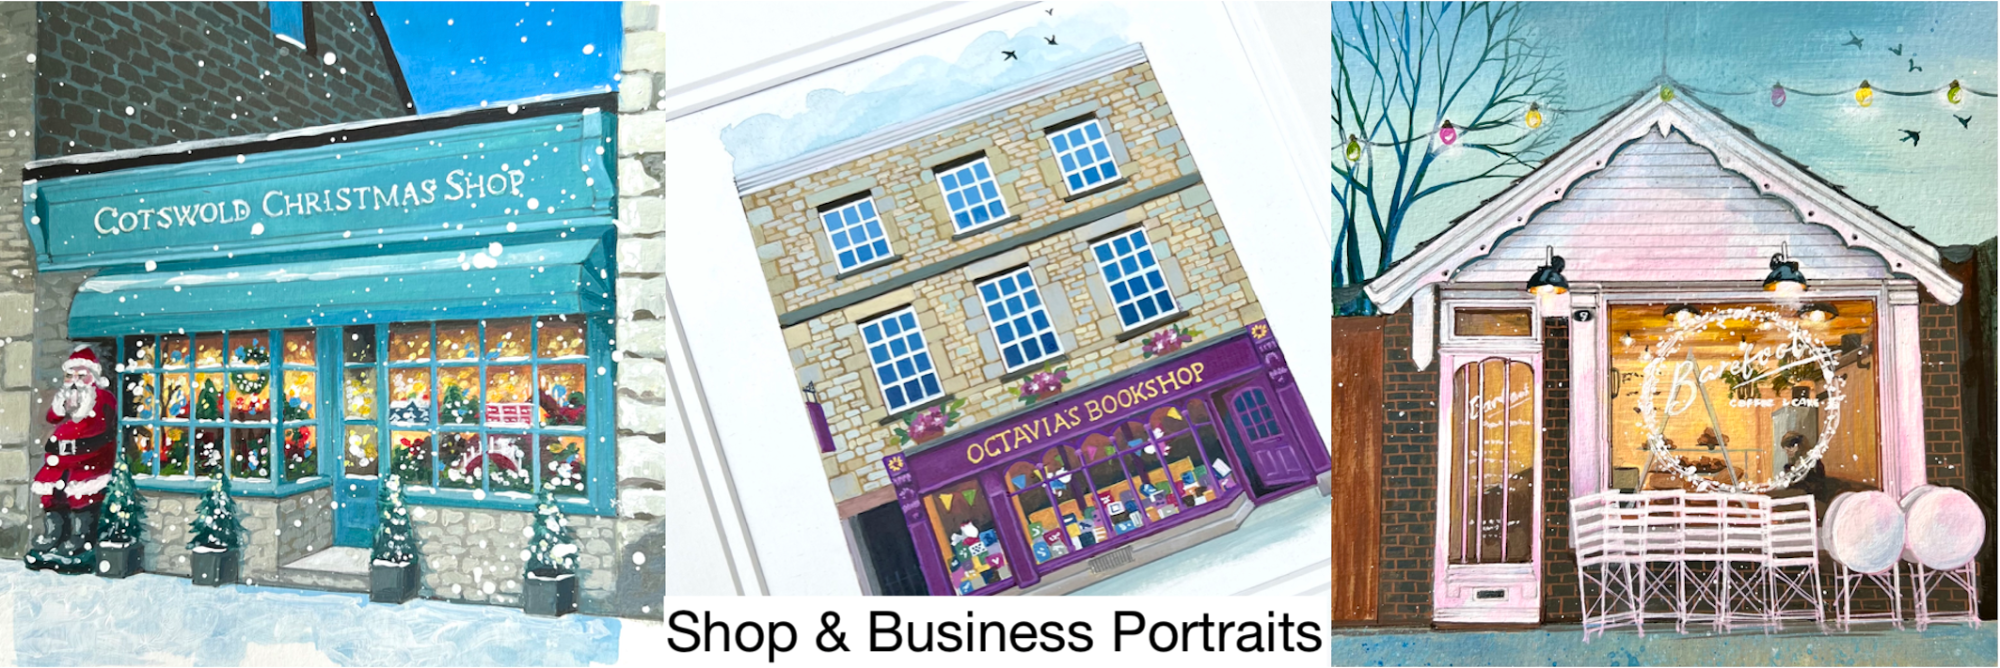 Shop and business portraits A.png